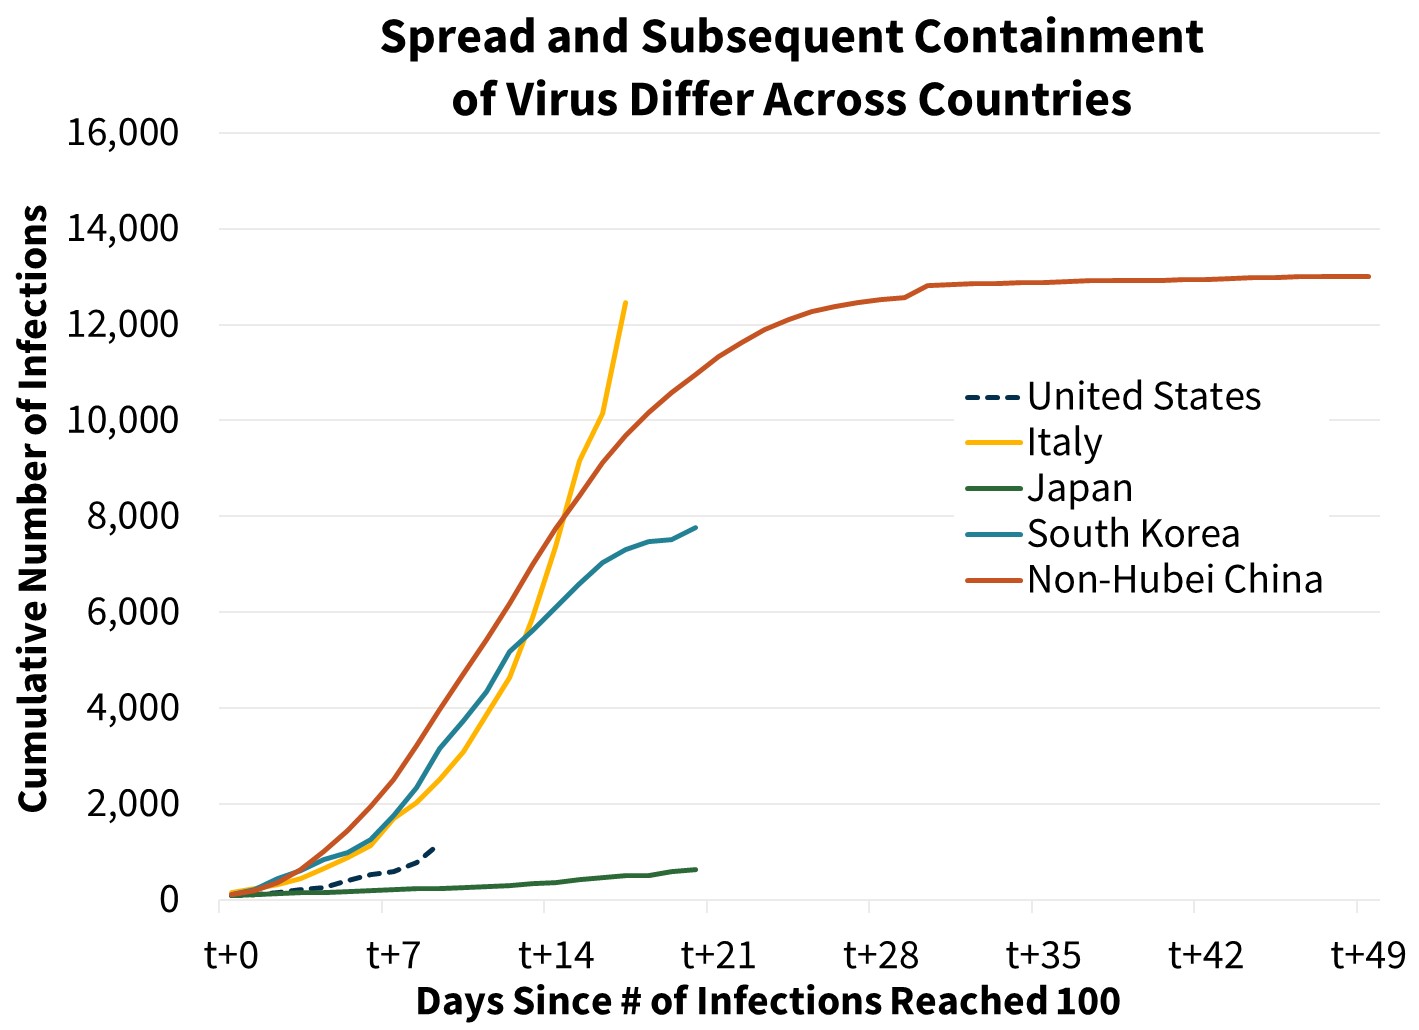 Spread and Subsequent Containment of Virus Differ Across Countries